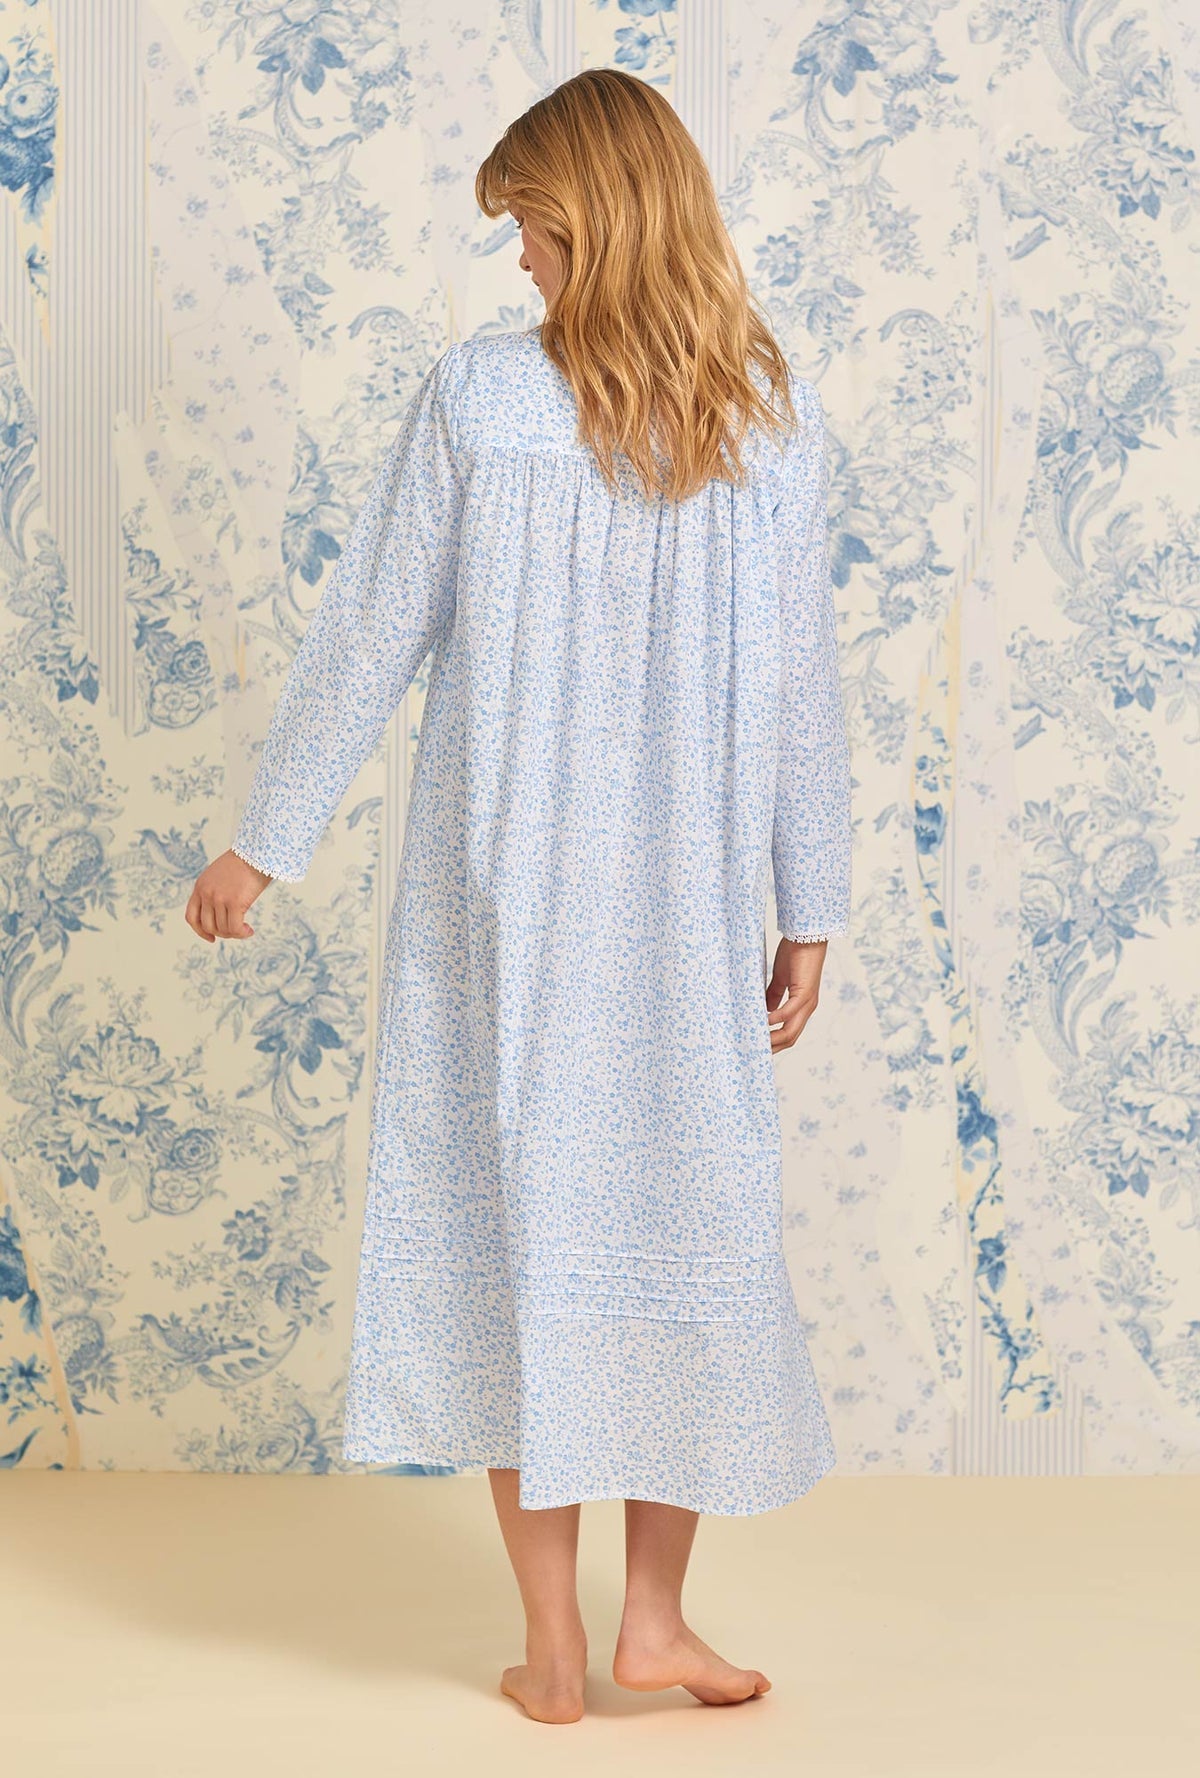 Eileen West Lawn Cotton Long Sleeve Nightgown - Poetic Floral